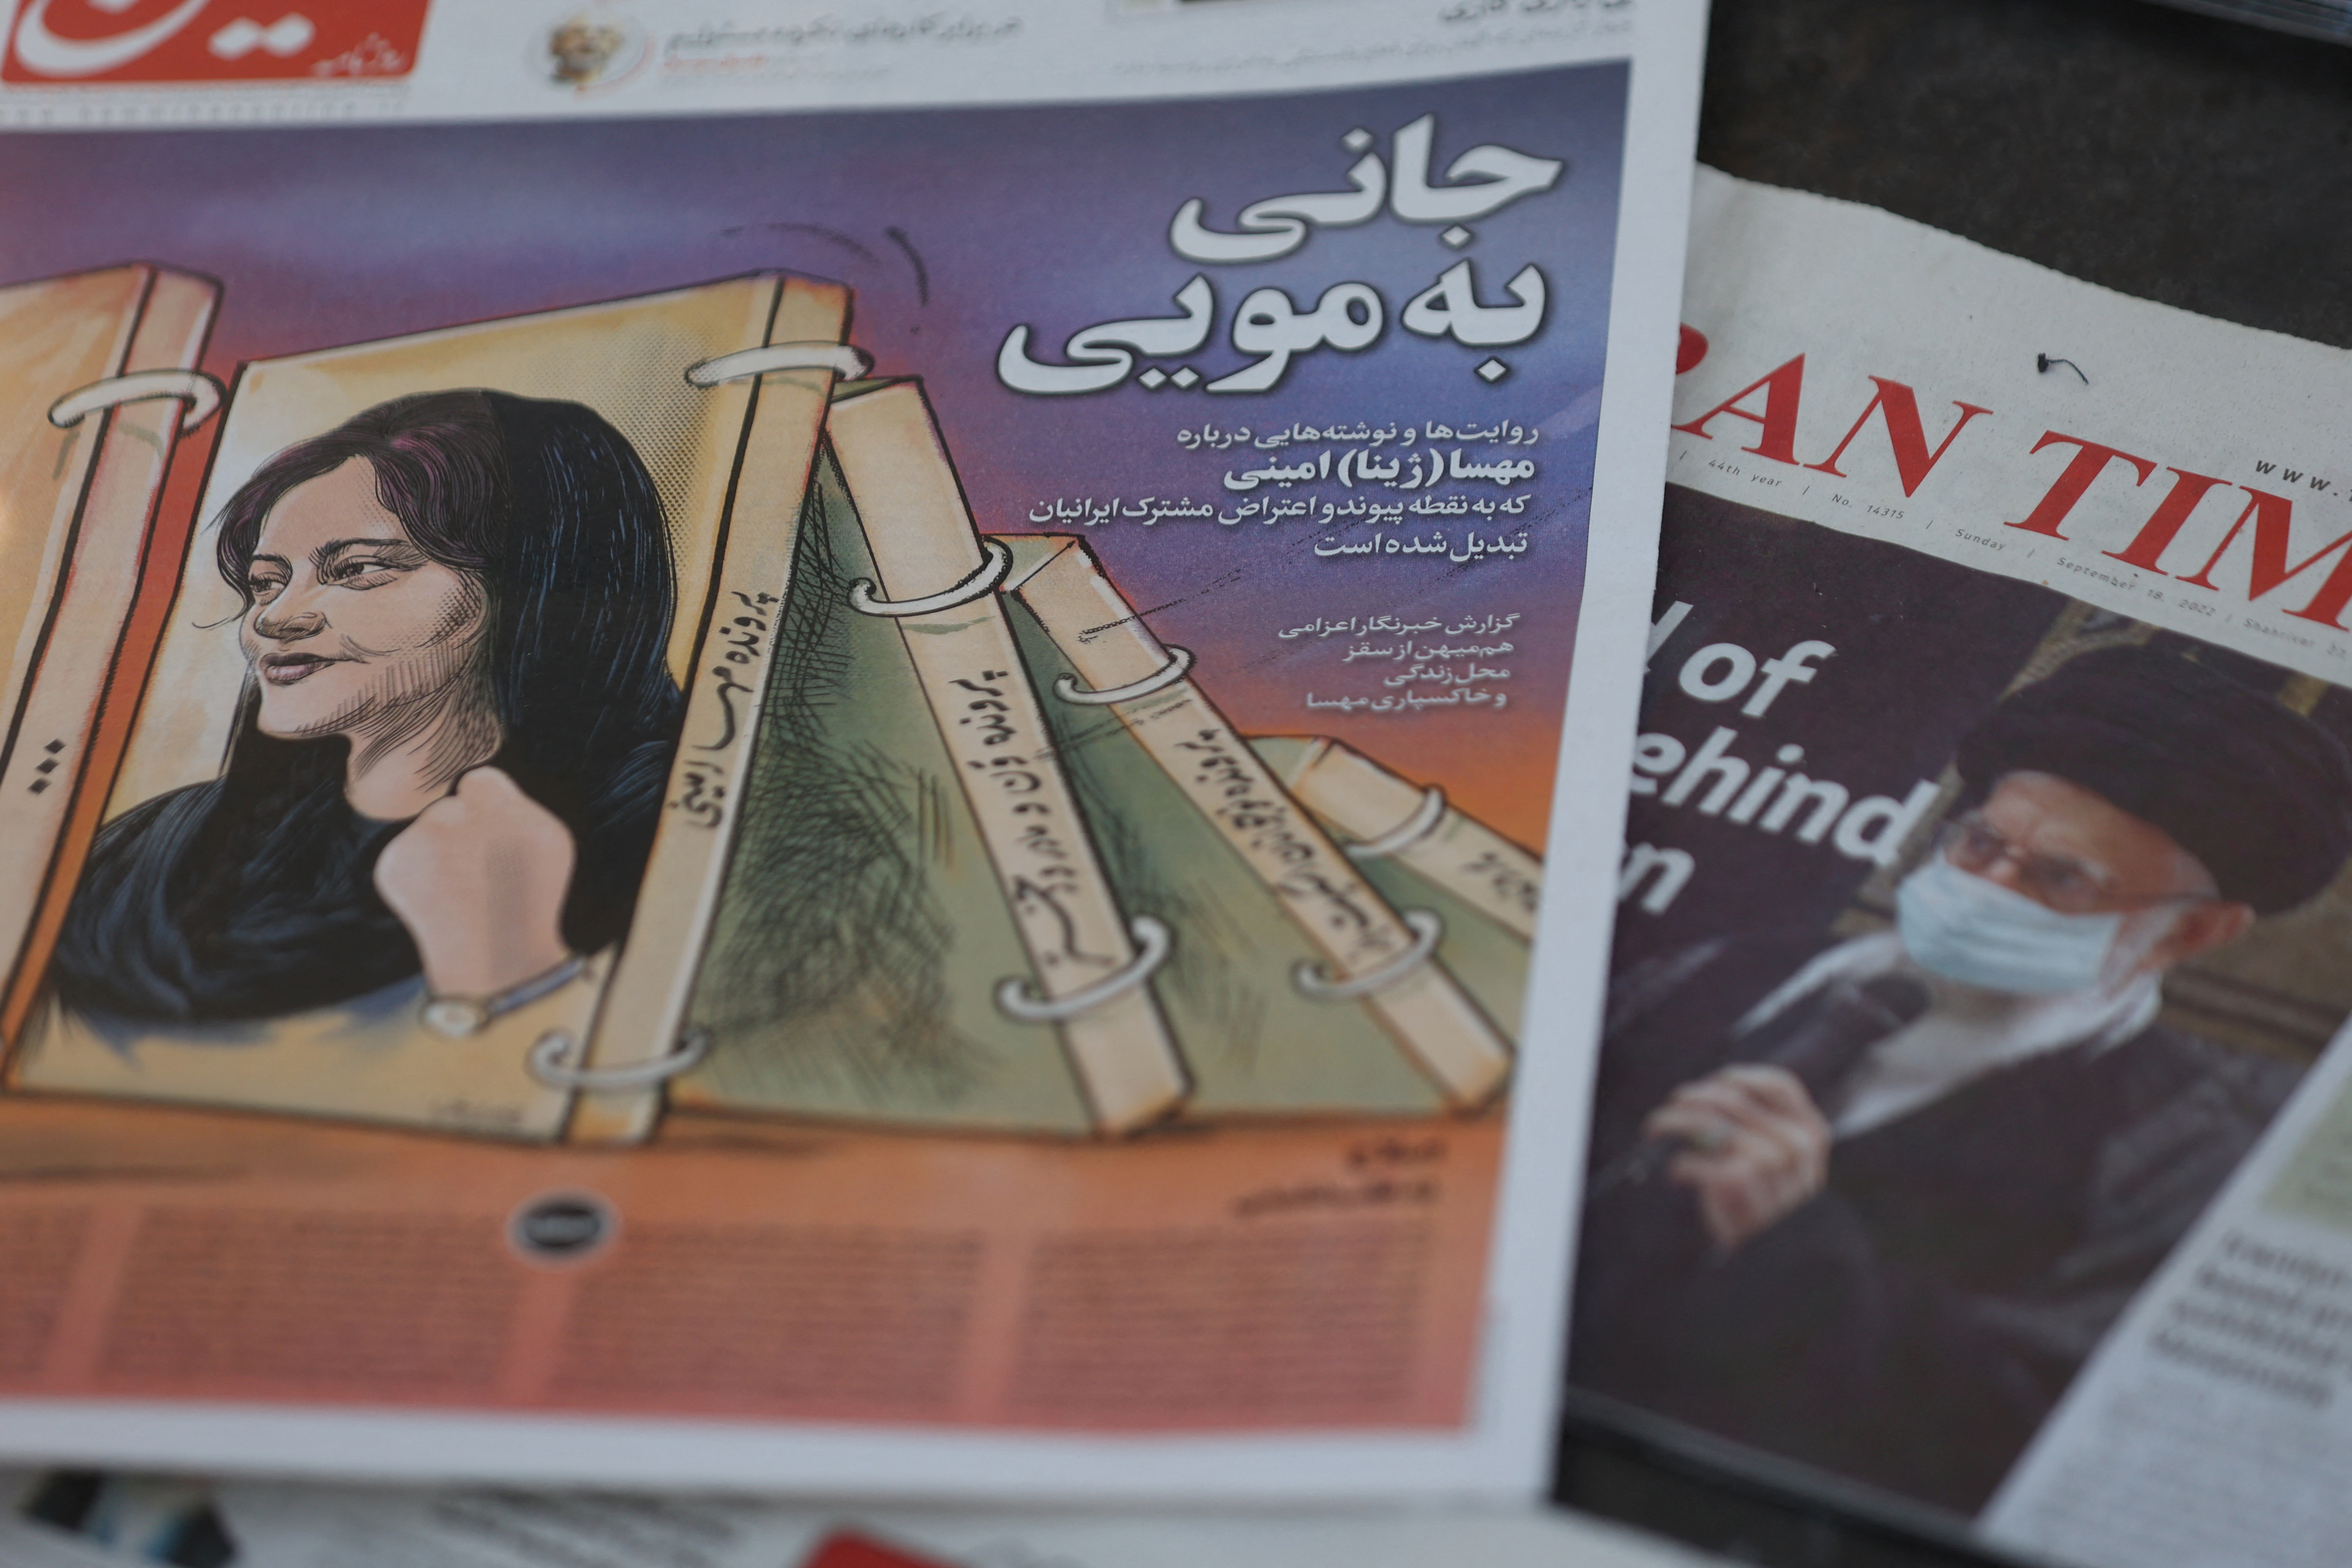 Newspapers with Amini, a victim of country's 